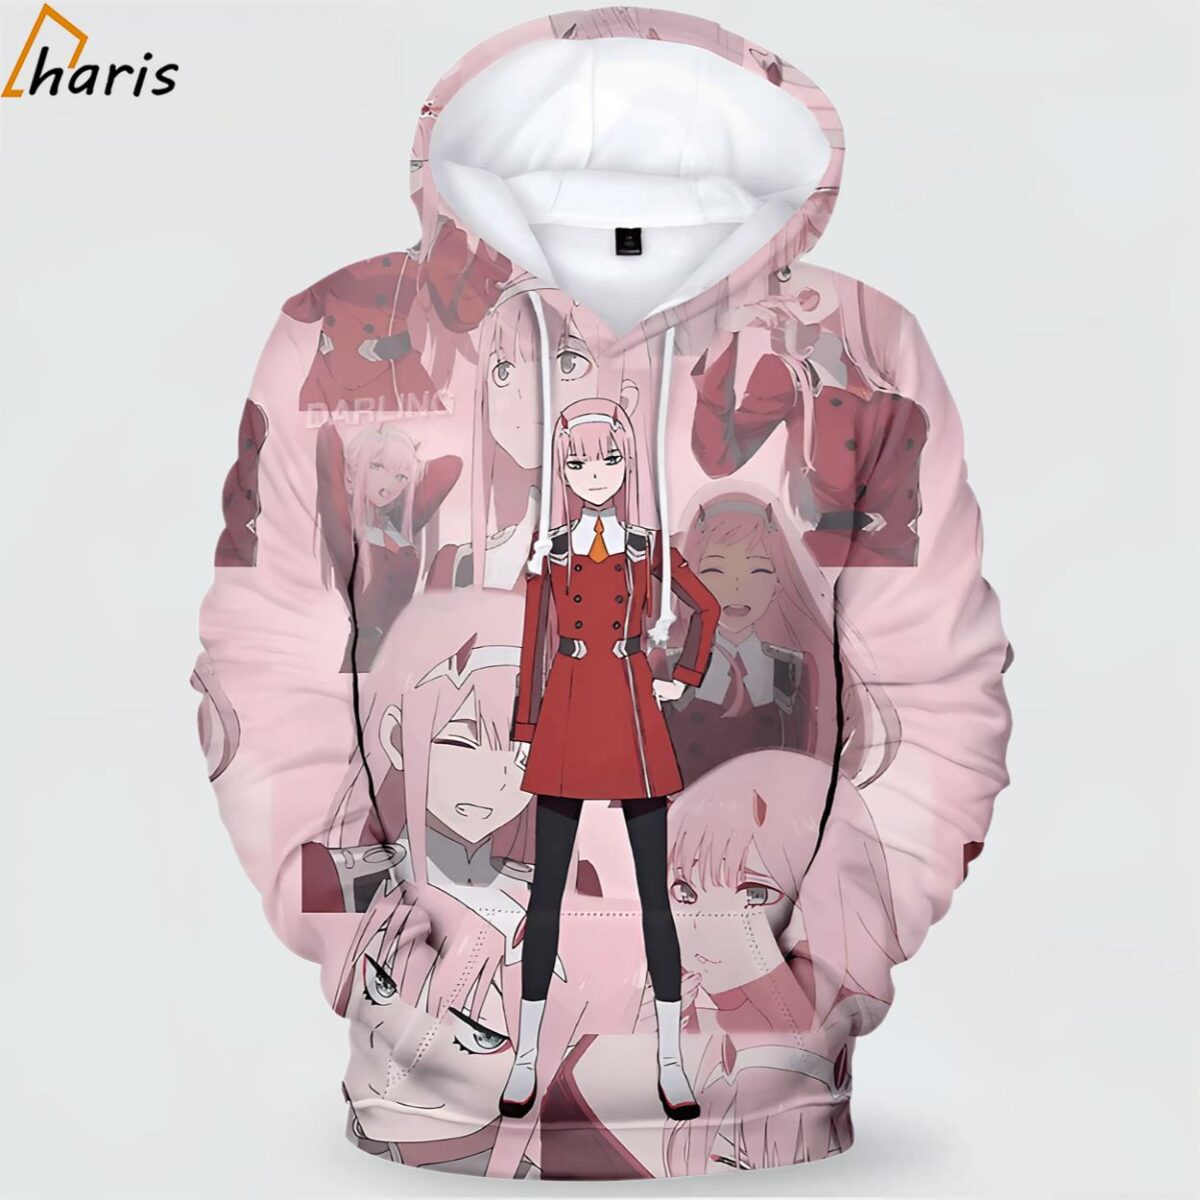 Zero Two Faces Pink 3D Hoodie 1 jersey